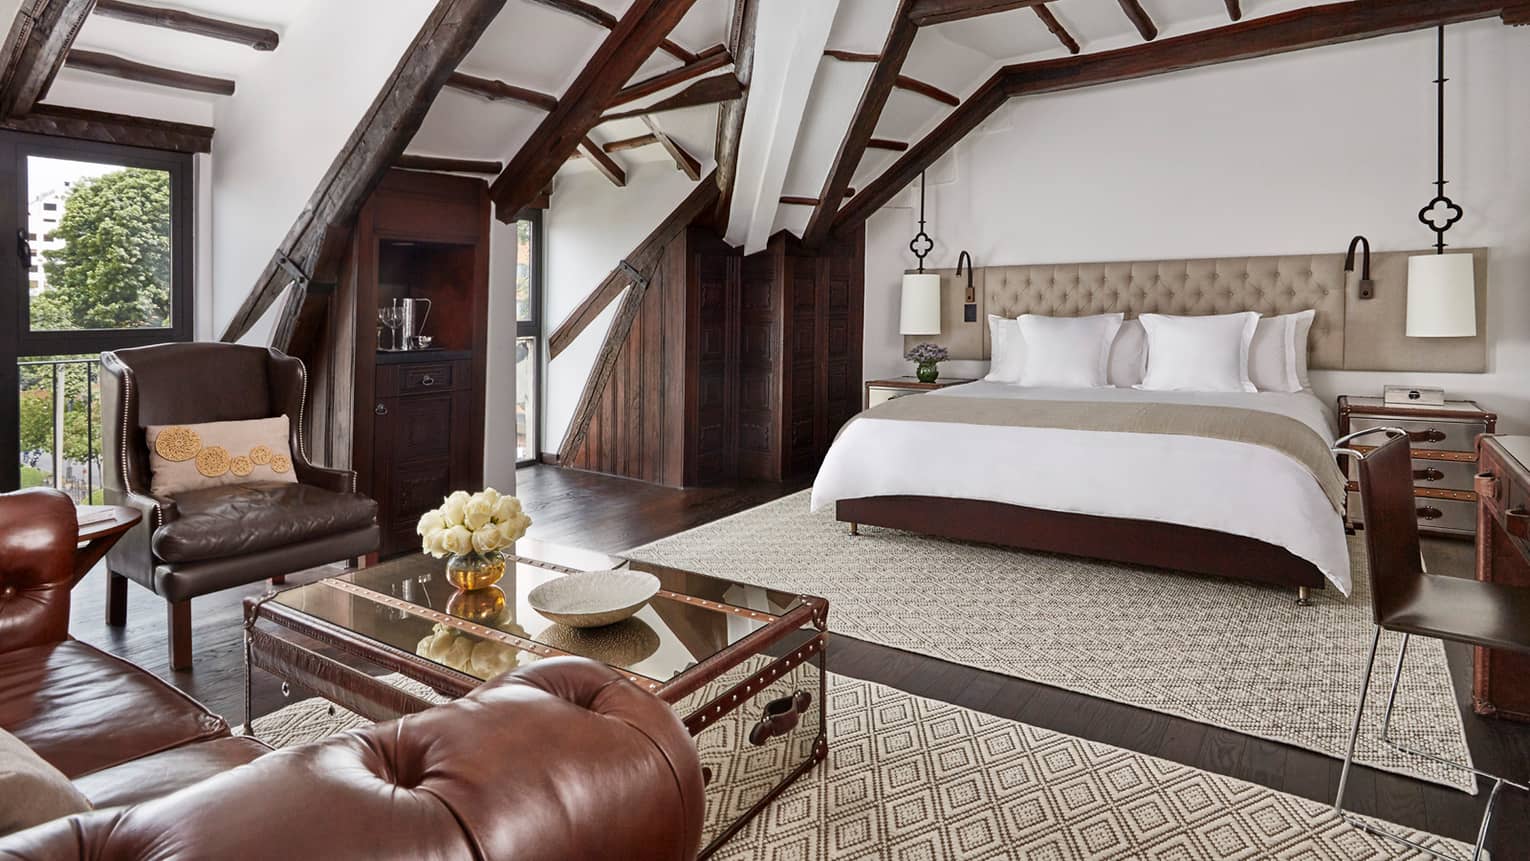 Sloped beam loft ceiling over hotel bed with padded headboard, brown leather armchair, table with flowers